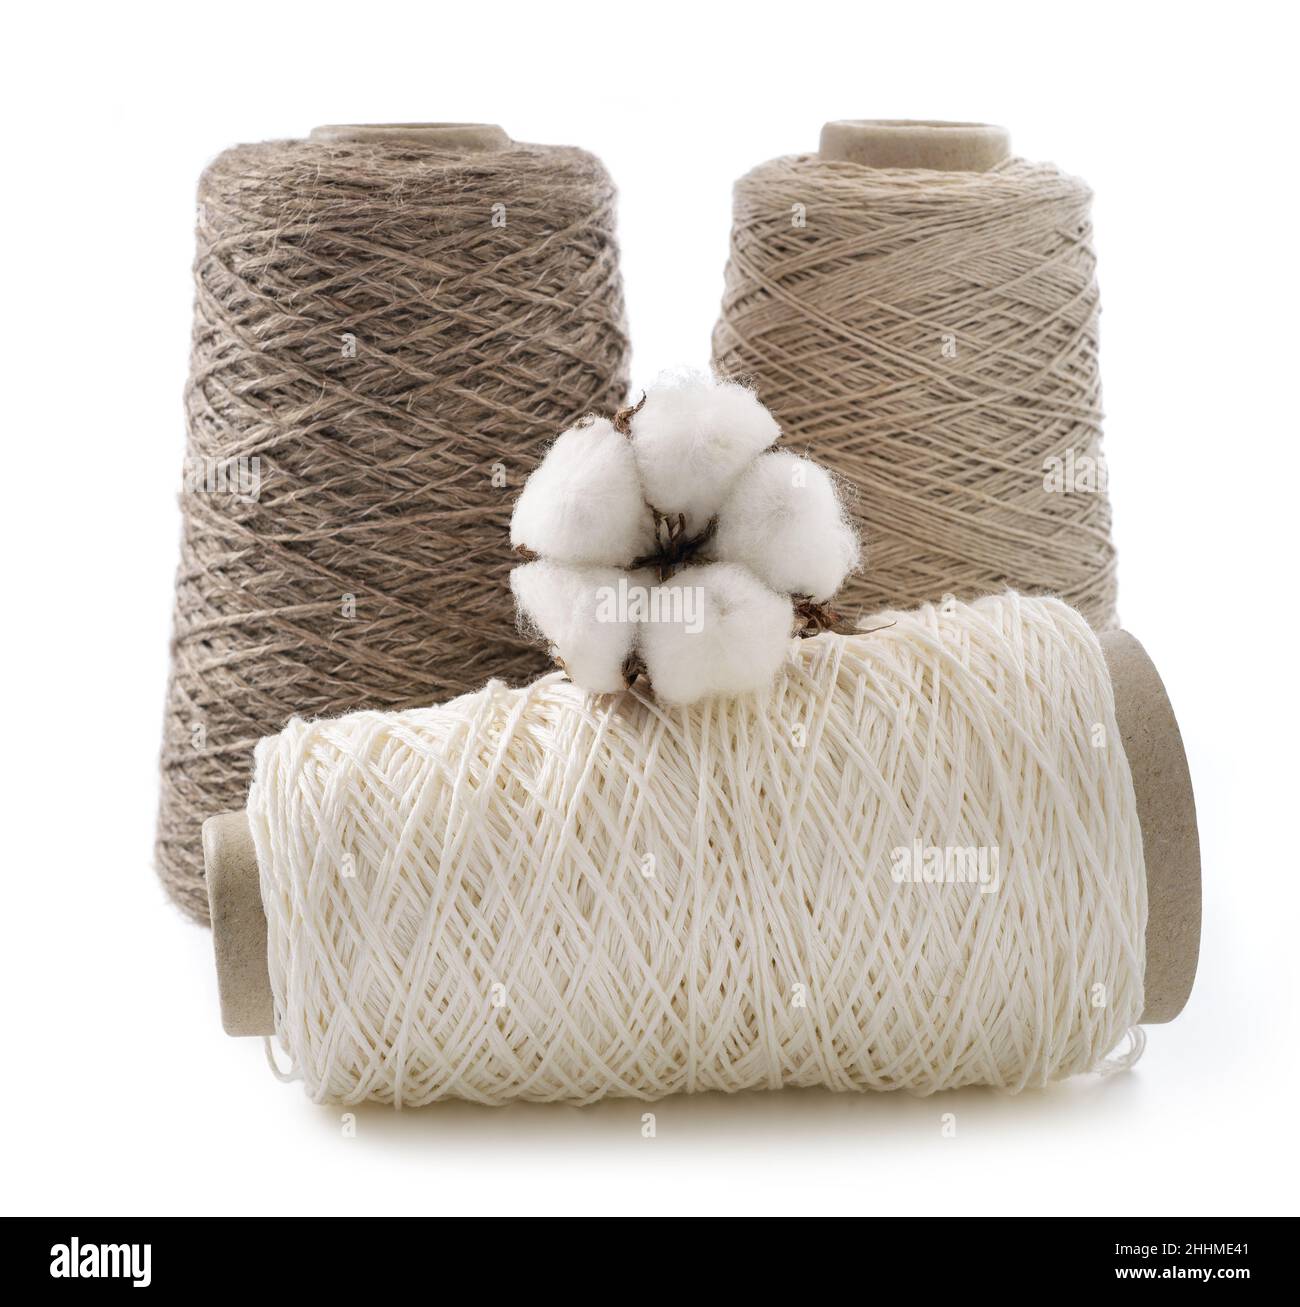 https://c8.alamy.com/comp/2HHME41/bobbins-of-yarn-with-cotton-flower-isolated-on-white-background-2HHME41.jpg